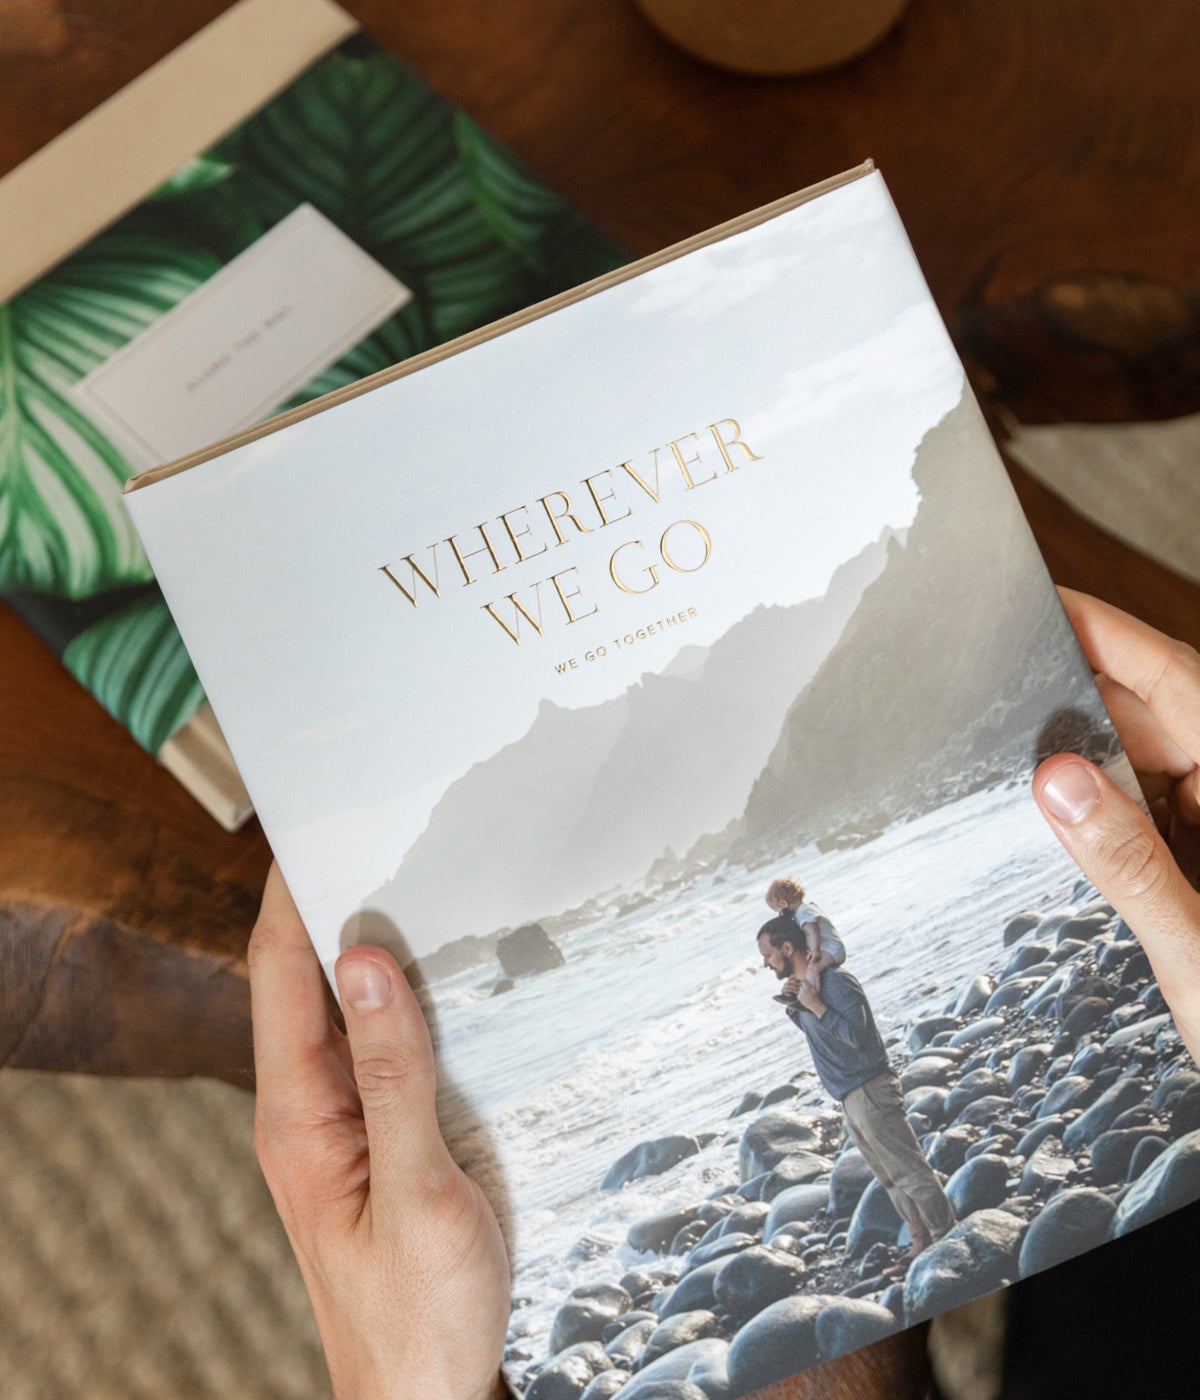 Hands holding up Artifact Uprising Hardcover Photo Book titled Wherever We Go featuring digital foil lettering and full dust jacket with photo of dad and baby on the beach